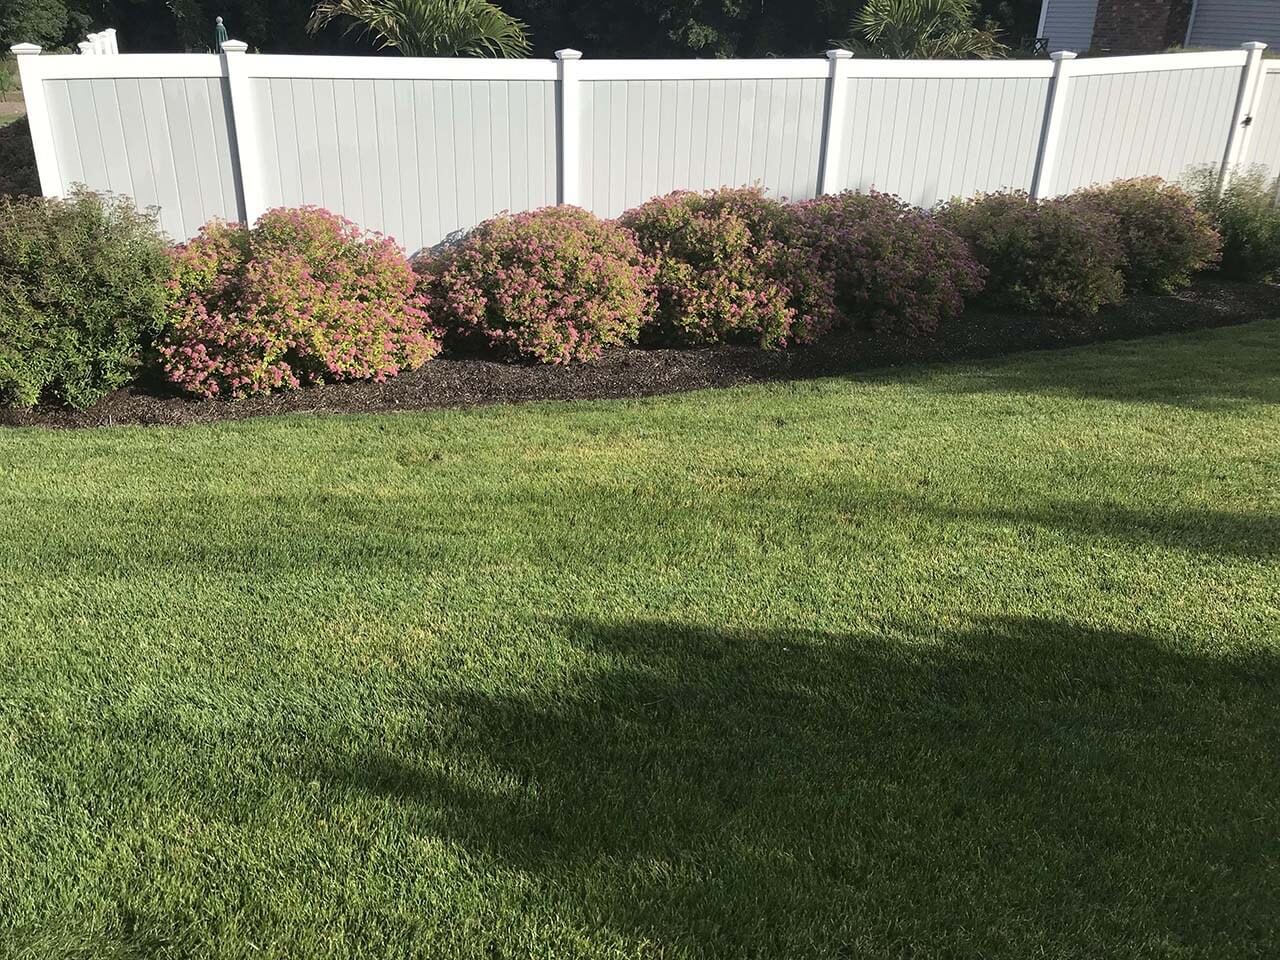 Shrubs beside the white fence | A-Z Landscaping